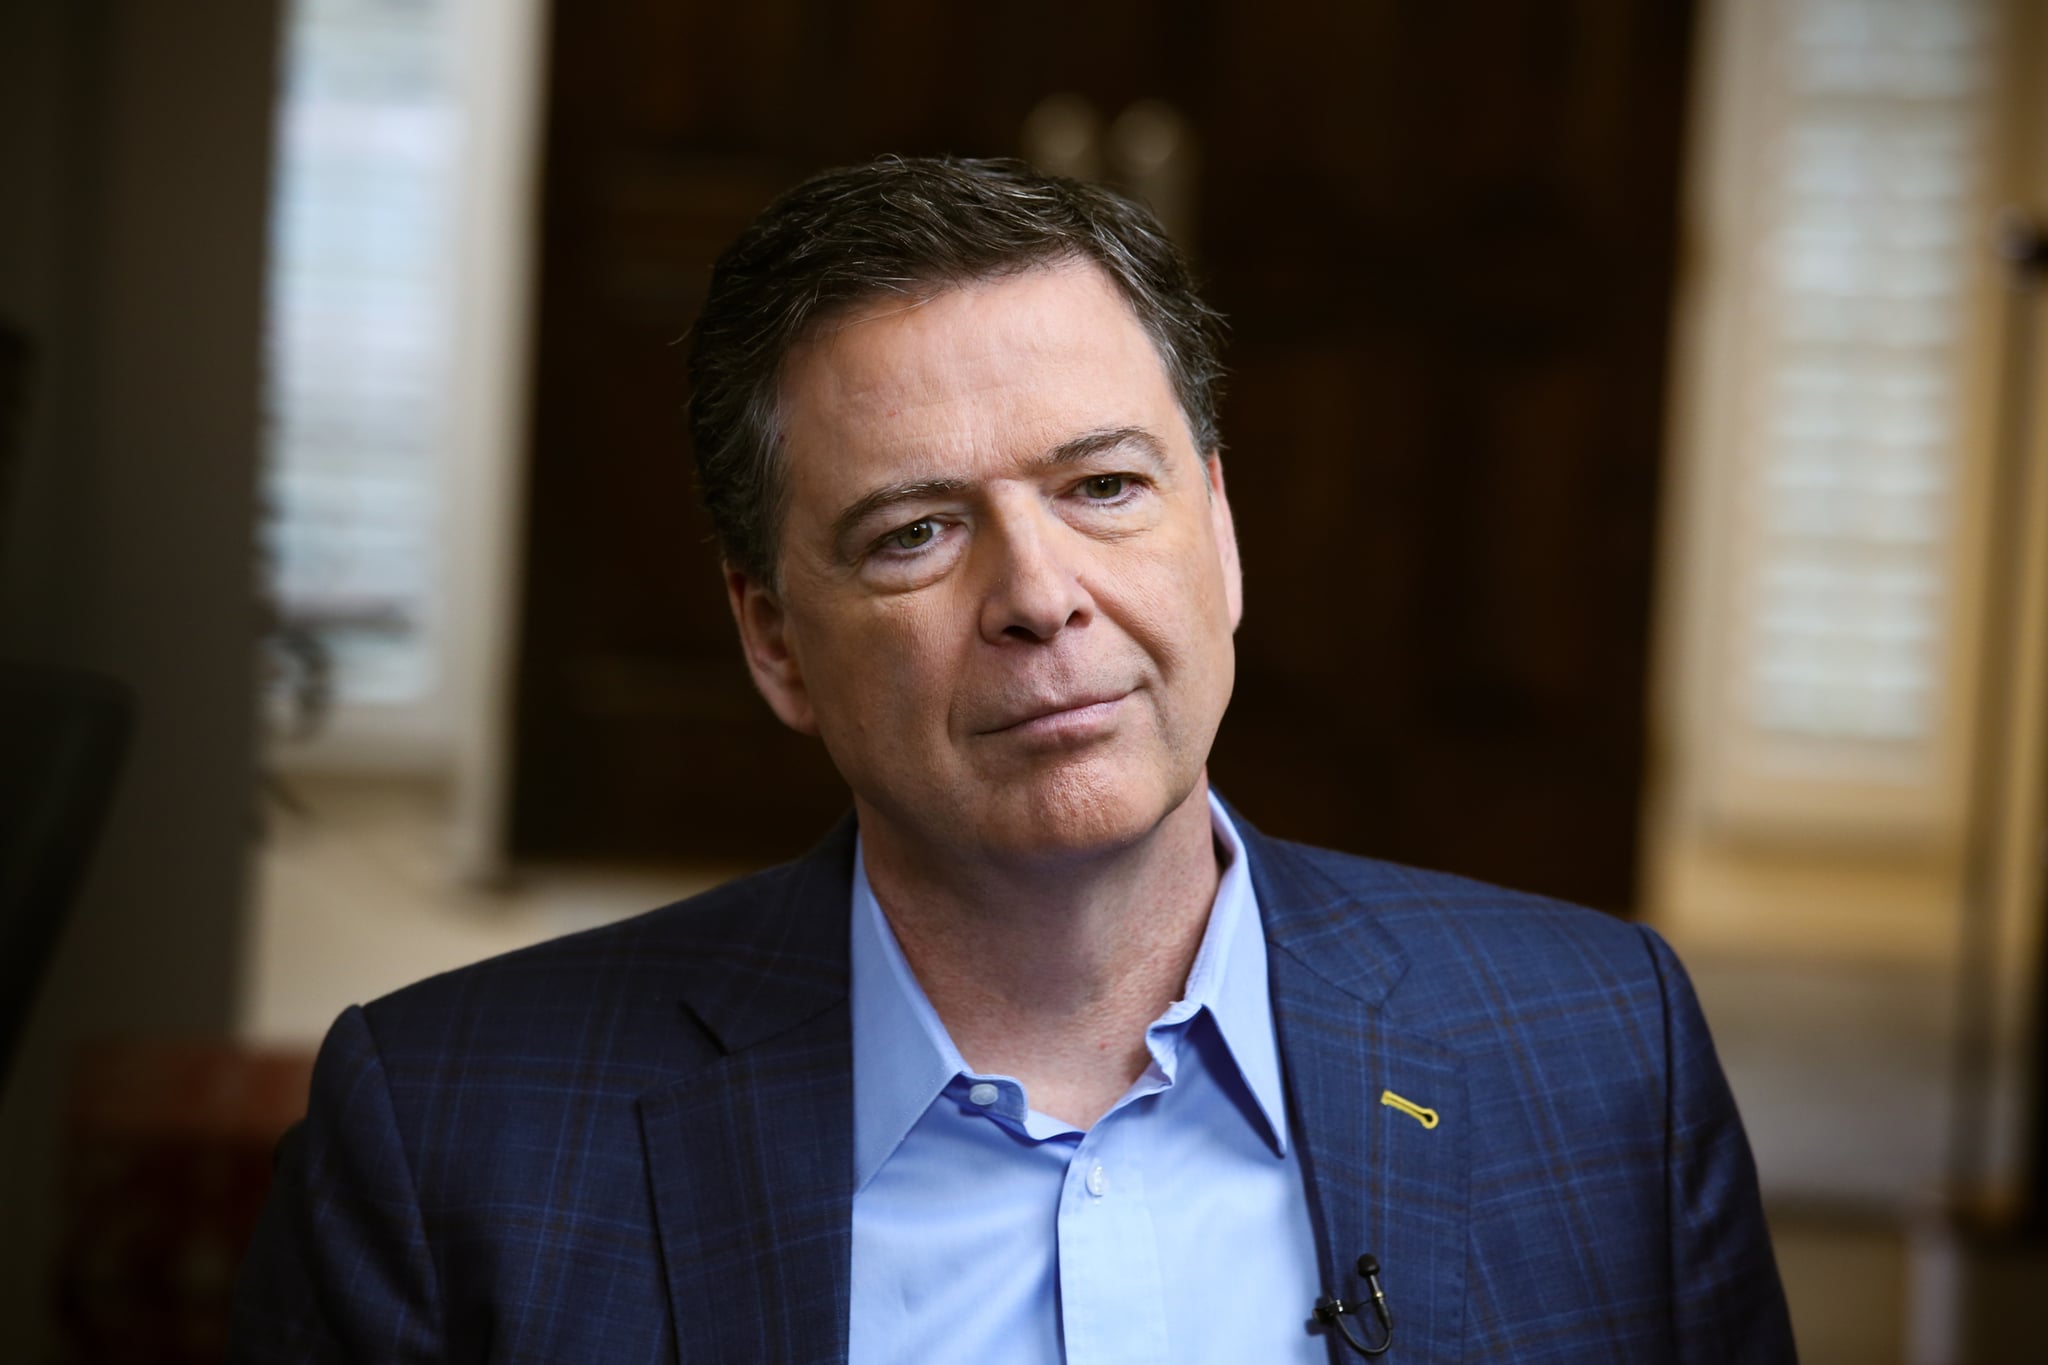 ABC NEWS - George Stephanopoulos sits down with former FBI director James Comey for an exclusive interview that will air during a primetime 